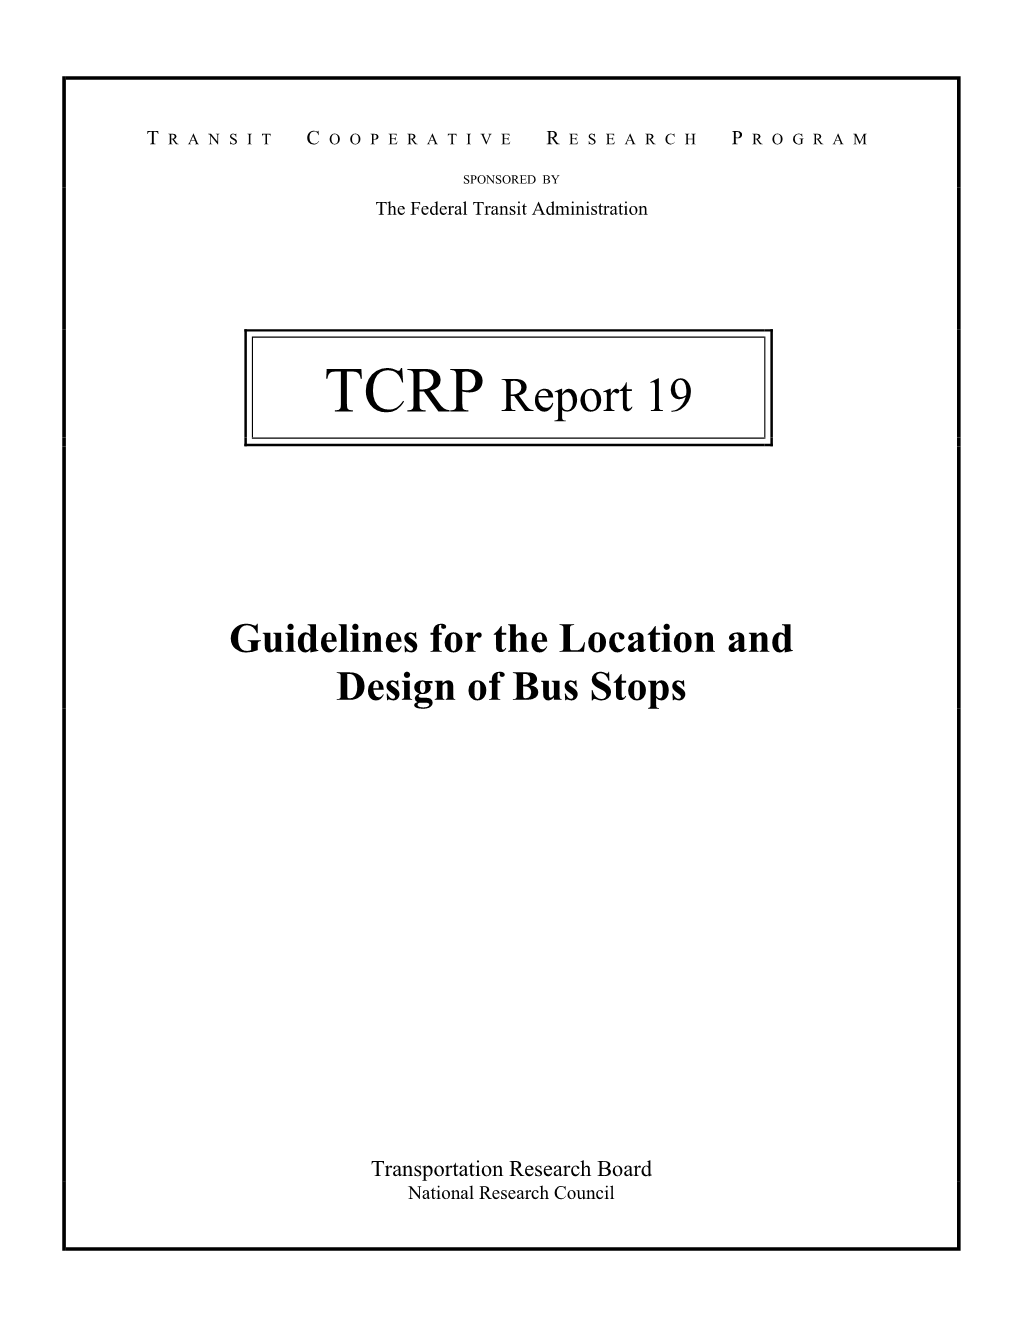 TCRP Report 19: Guidelines for the Location and Design of Bus Stops